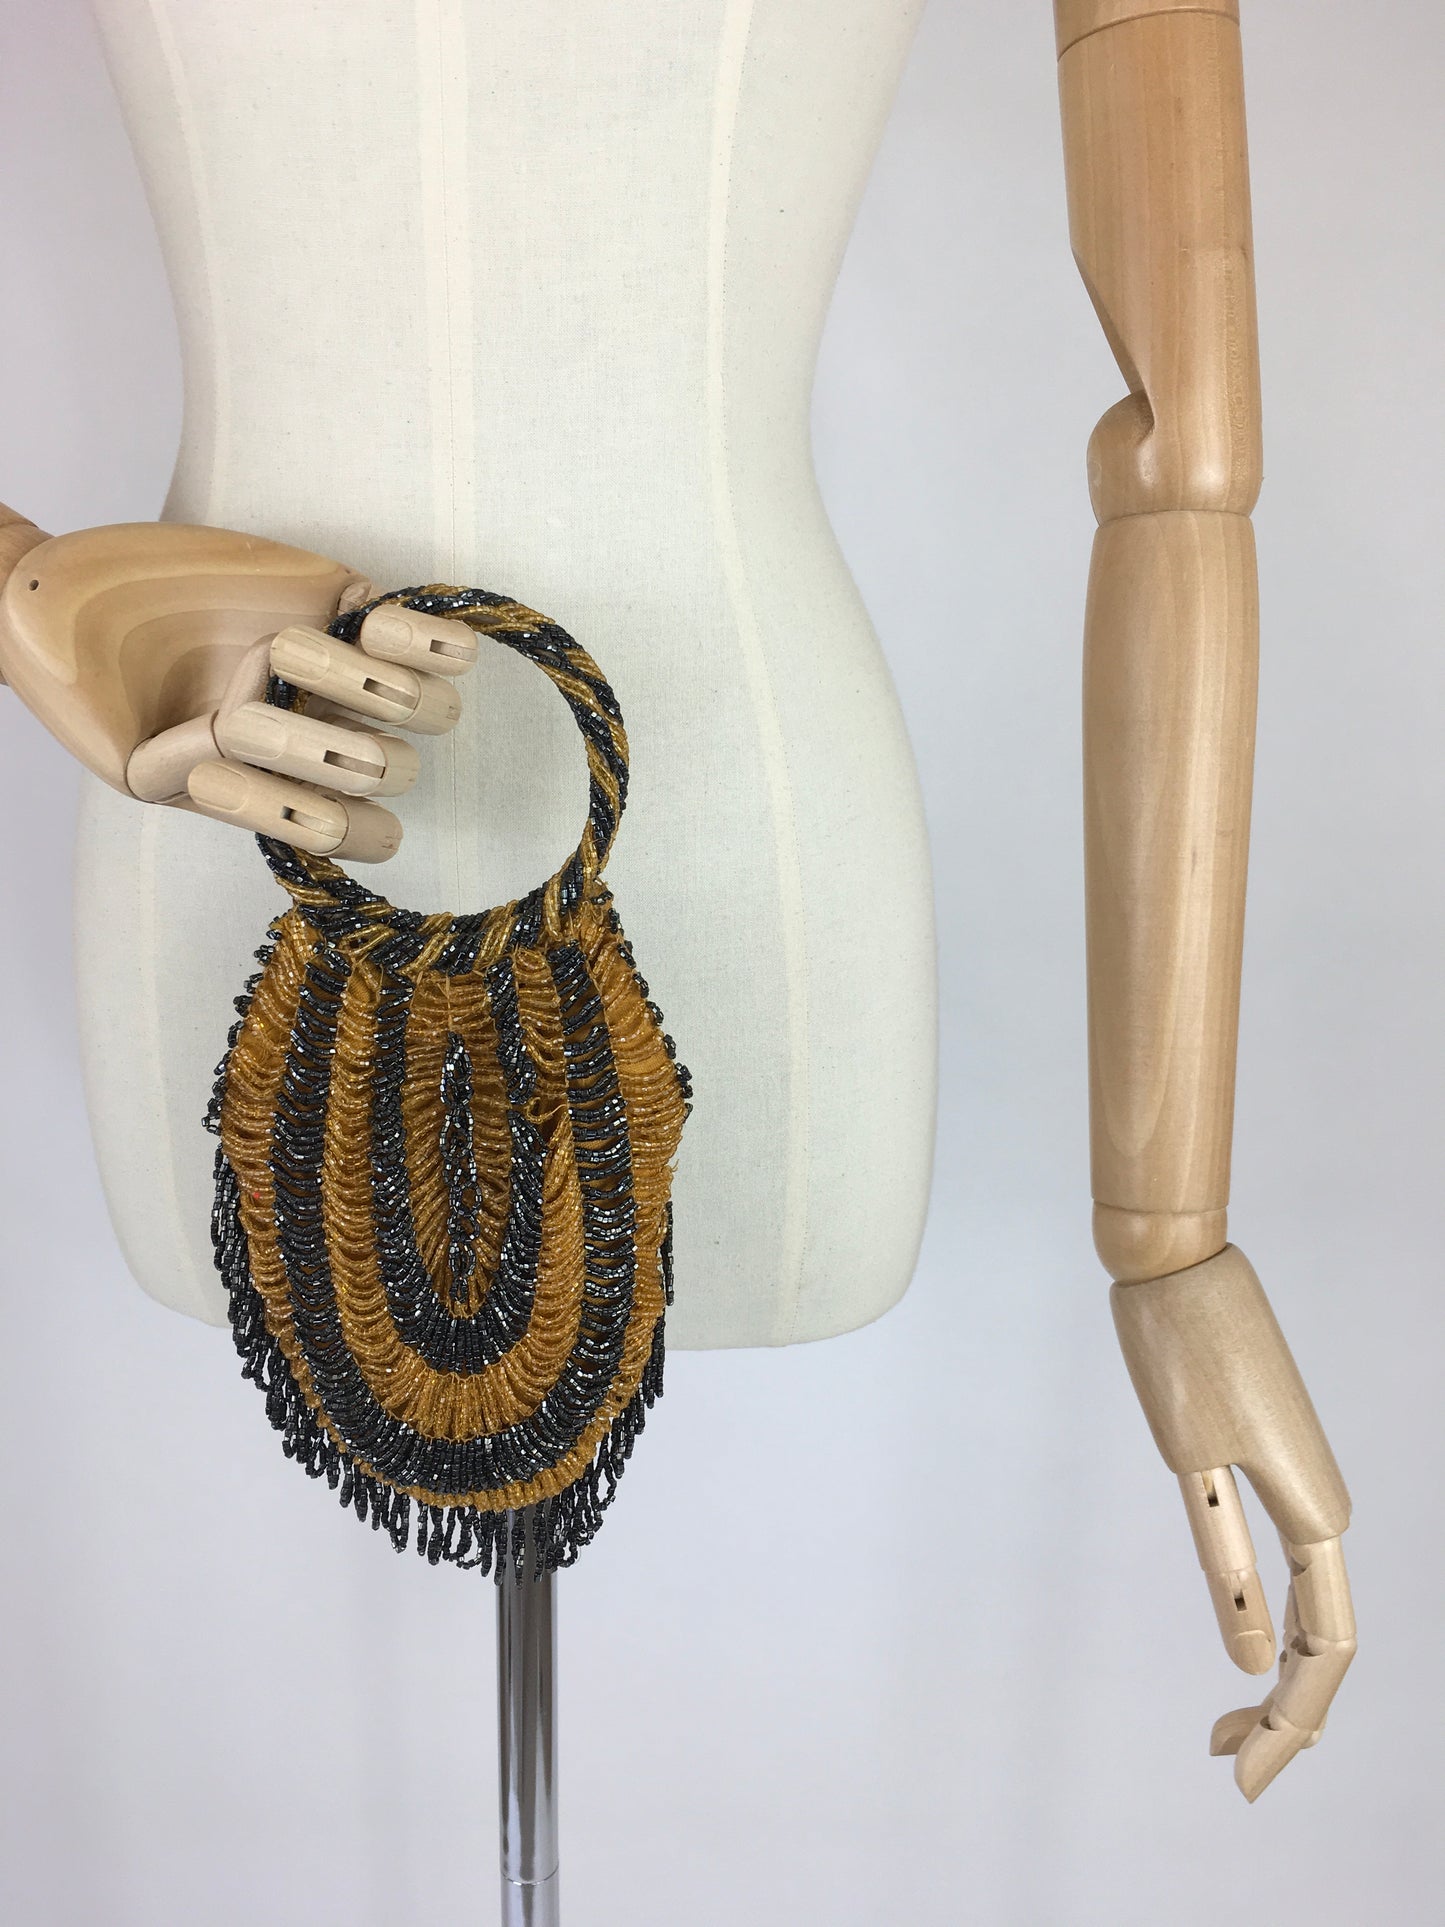 Original 1920s Beaded Evening Bag - In A Fabulous Gold and Black Colour Pallet